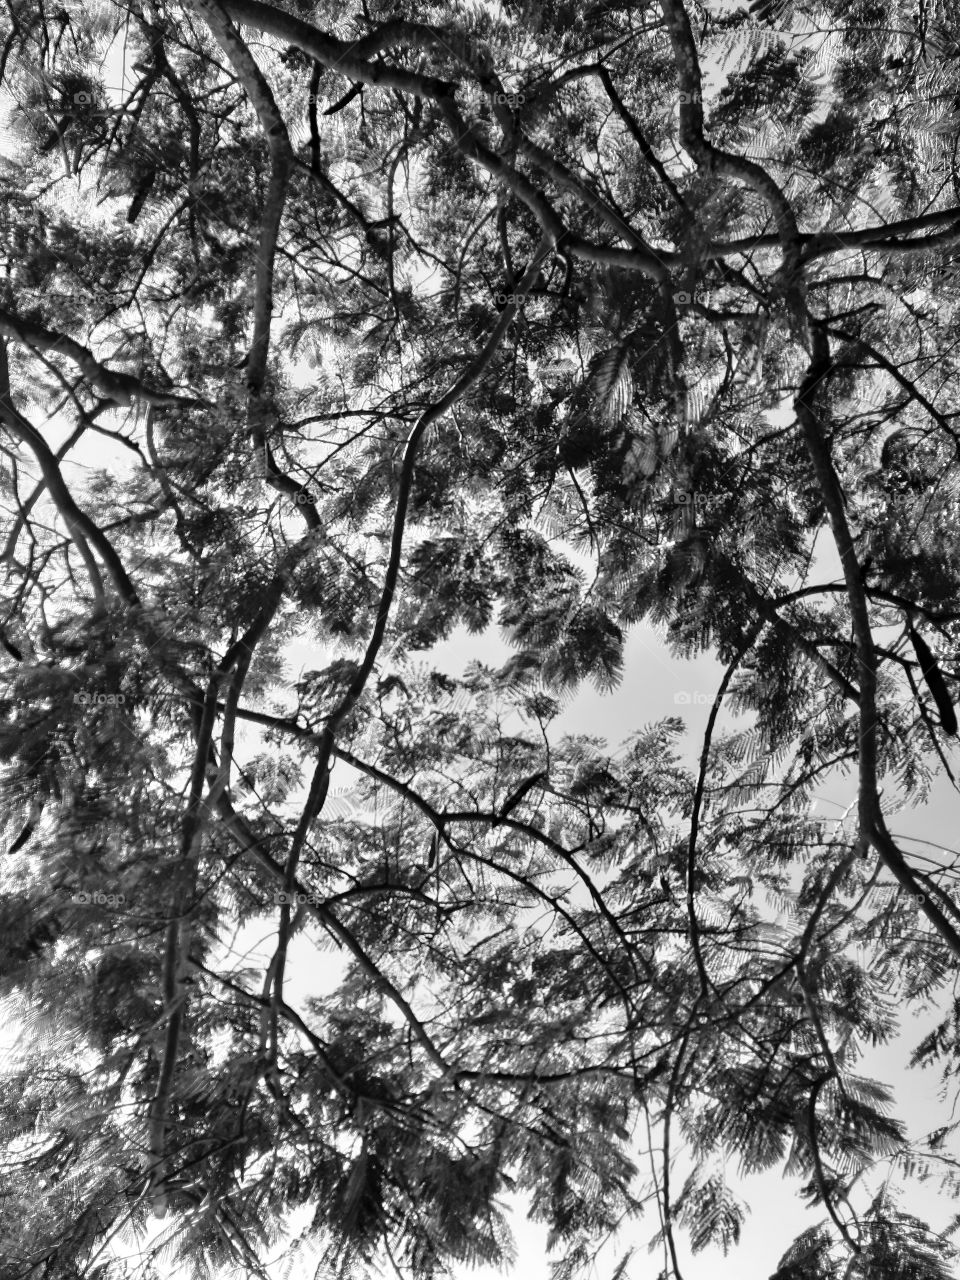 The Tree Branches Canopy